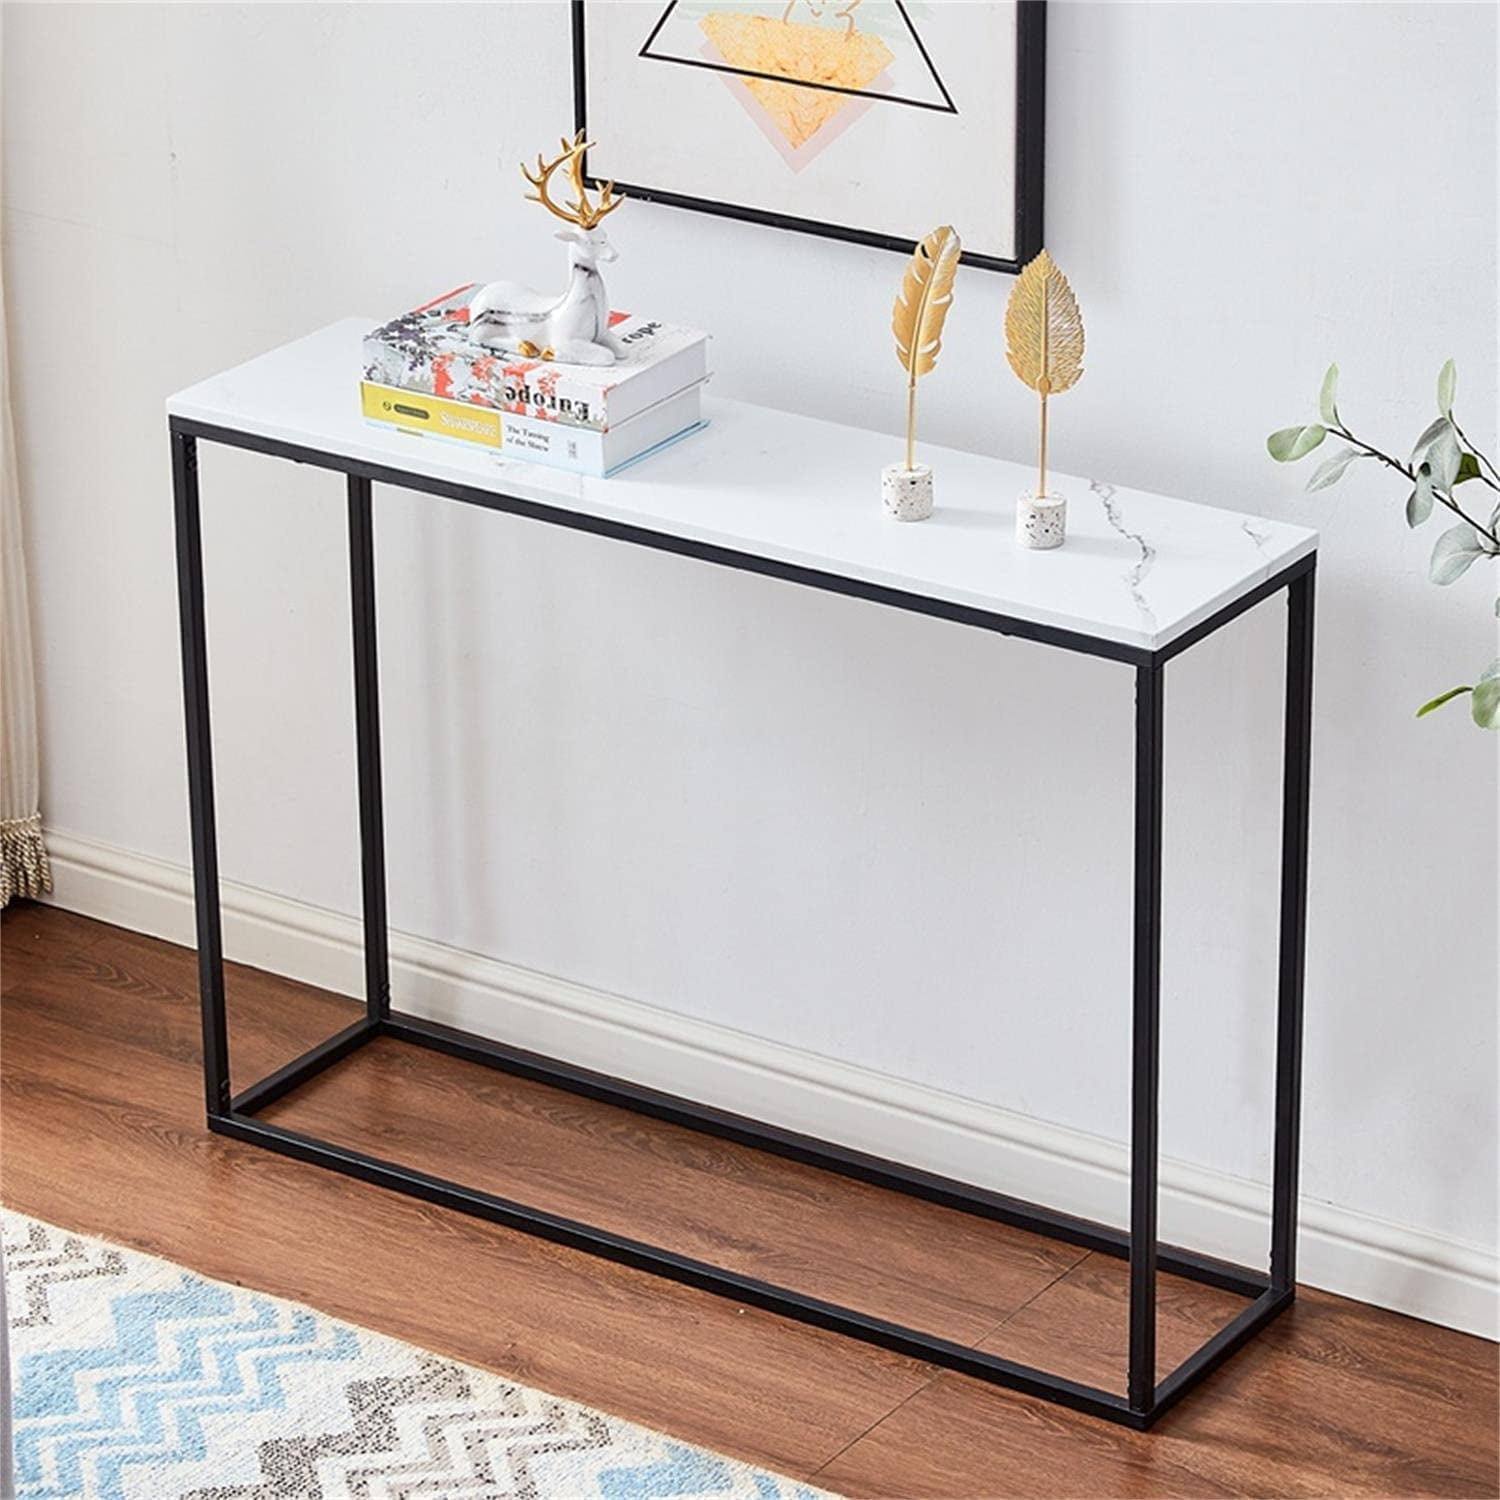 Cplxroc Faux Marble Console Table Accent Coffee Table with Metal Frame Hall Furniture Snack Entryway Table Couch Table for Hallway MDF Entry Table Black Frame Entrance Sofa Table Living Room